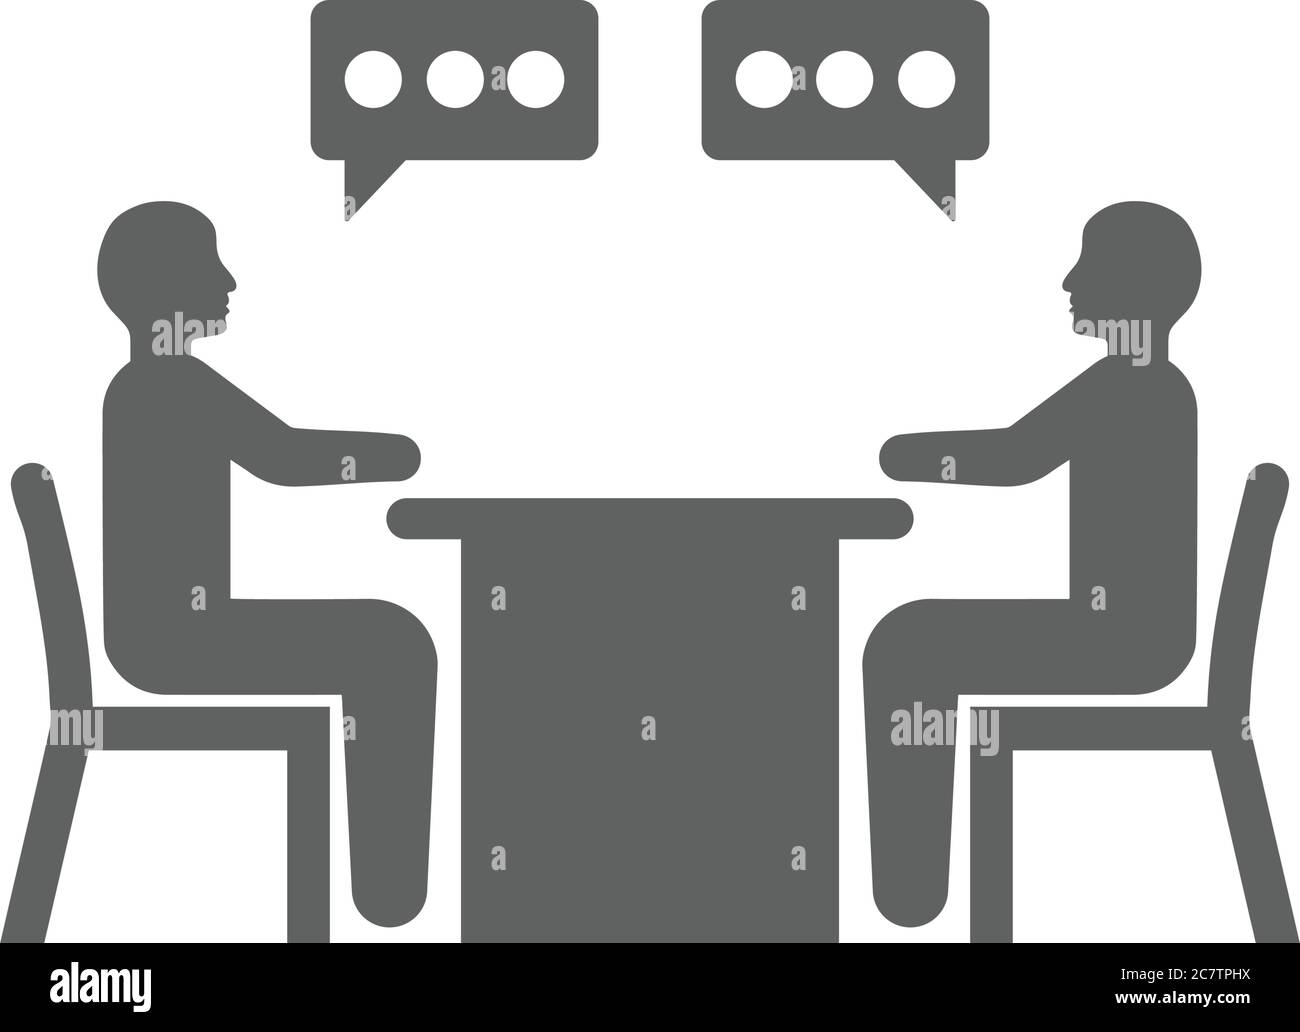 Business conversation icon. Use for commercial, print media, web or any type of design projects. Stock Vector